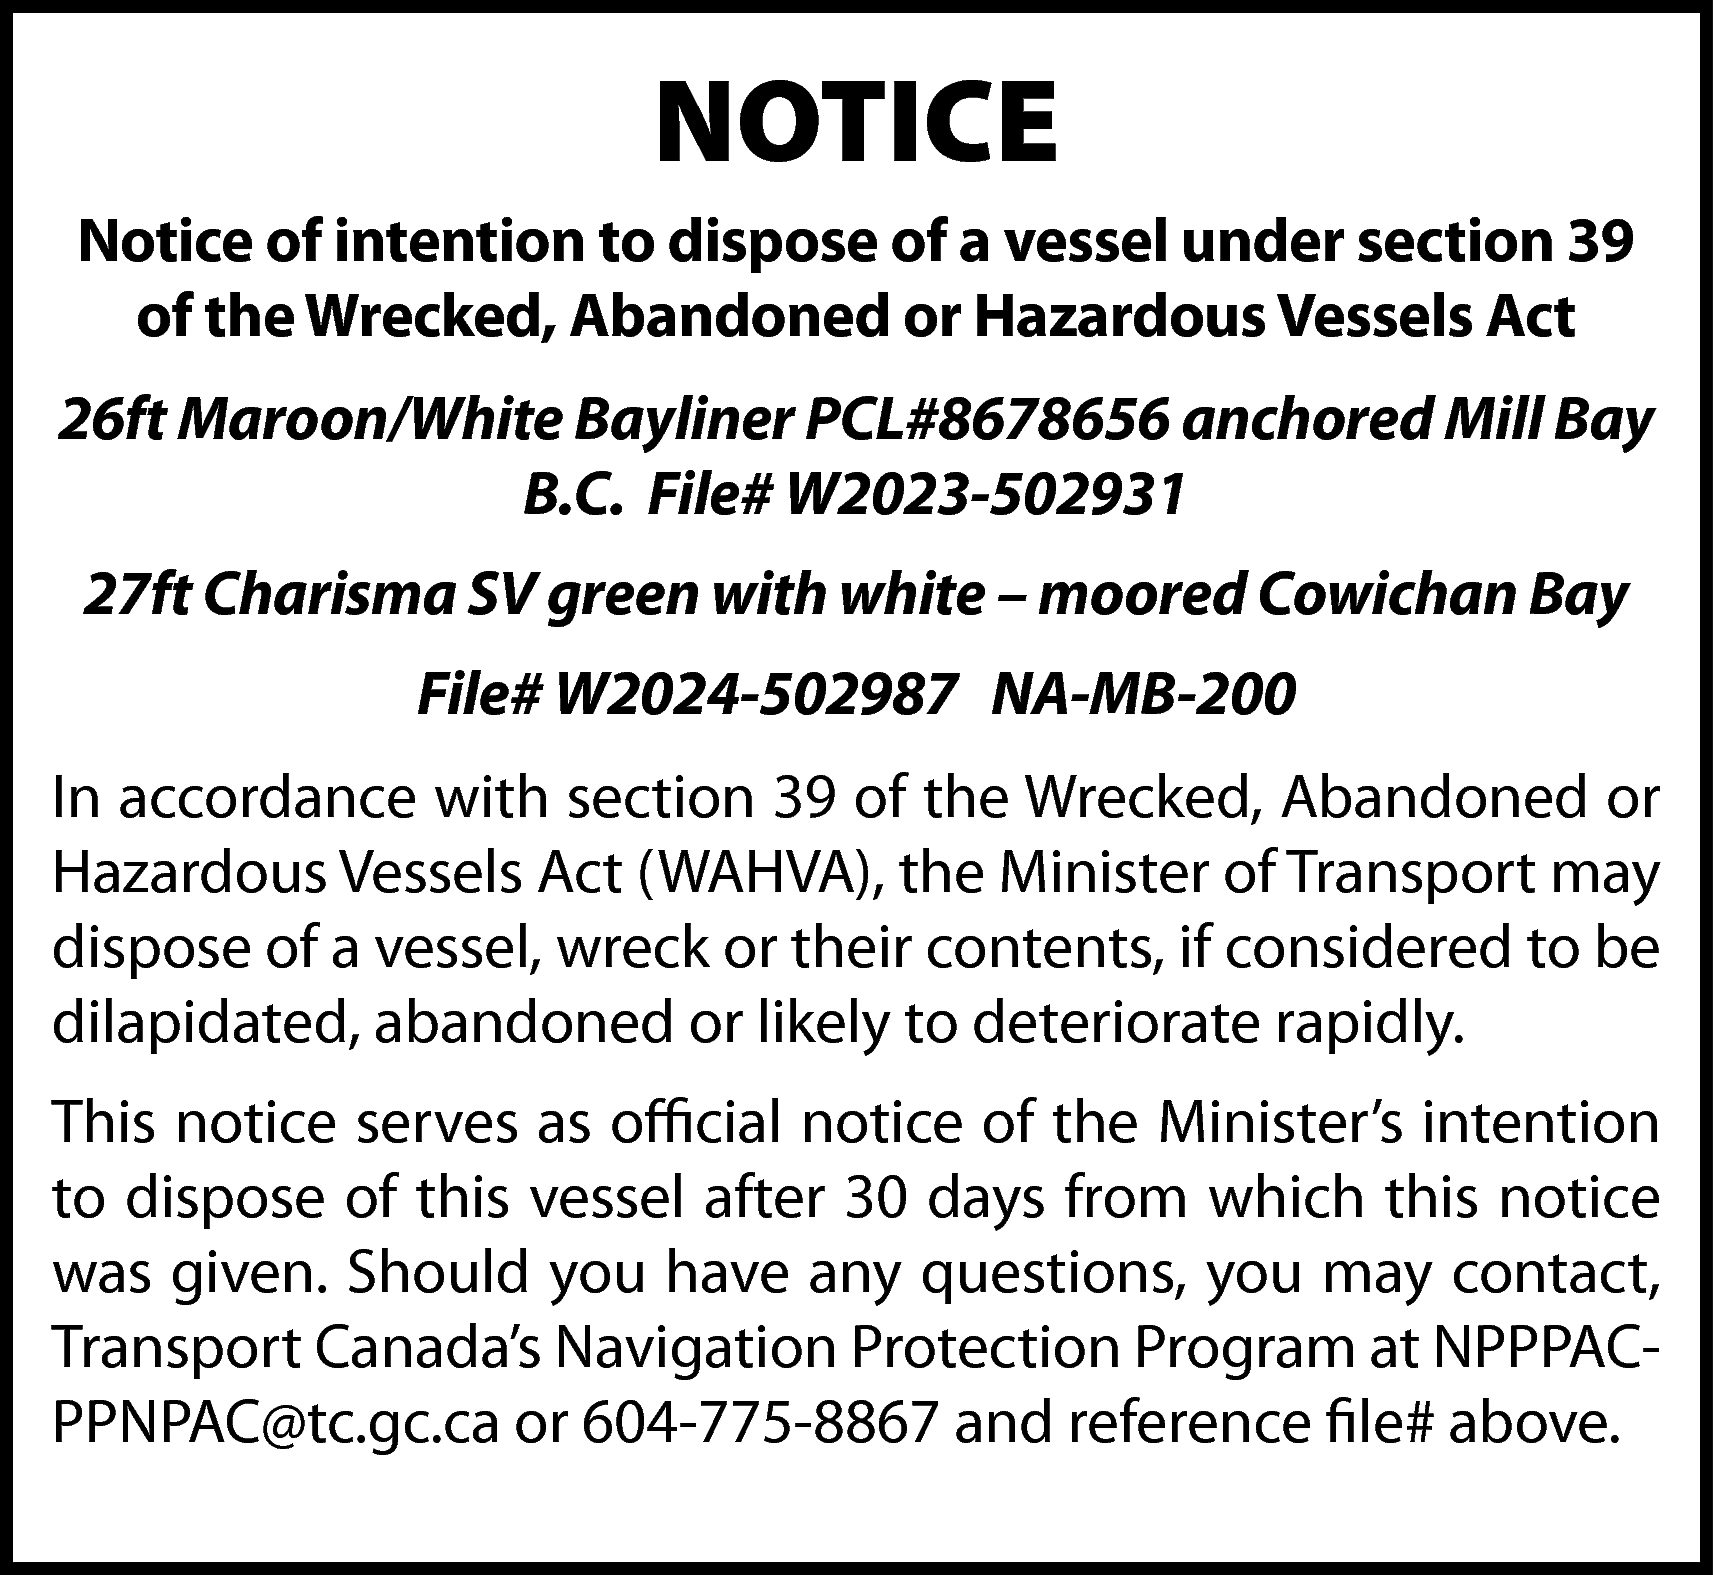 NOTICE <br>Notice of intention to  NOTICE  Notice of intention to dispose of a vessel under section 39  of the Wrecked, Abandoned or Hazardous Vessels Act  26ft Maroon/White Bayliner PCL#8678656 anchored Mill Bay  B.C. File# W2023-502931  27ft Charisma SV green with white – moored Cowichan Bay  File# W2024-502987 NA-MB-200  In accordance with section 39 of the Wrecked, Abandoned or  Hazardous Vessels Act (WAHVA), the Minister of Transport may  dispose of a vessel, wreck or their contents, if considered to be  dilapidated, abandoned or likely to deteriorate rapidly.  This notice serves as official notice of the Minister’s intention  to dispose of this vessel after 30 days from which this notice  was given. Should you have any questions, you may contact,  Transport Canada’s Navigation Protection Program at NPPPACPPNPAC@tc.gc.ca or 604-775-8867 and reference file# above.    